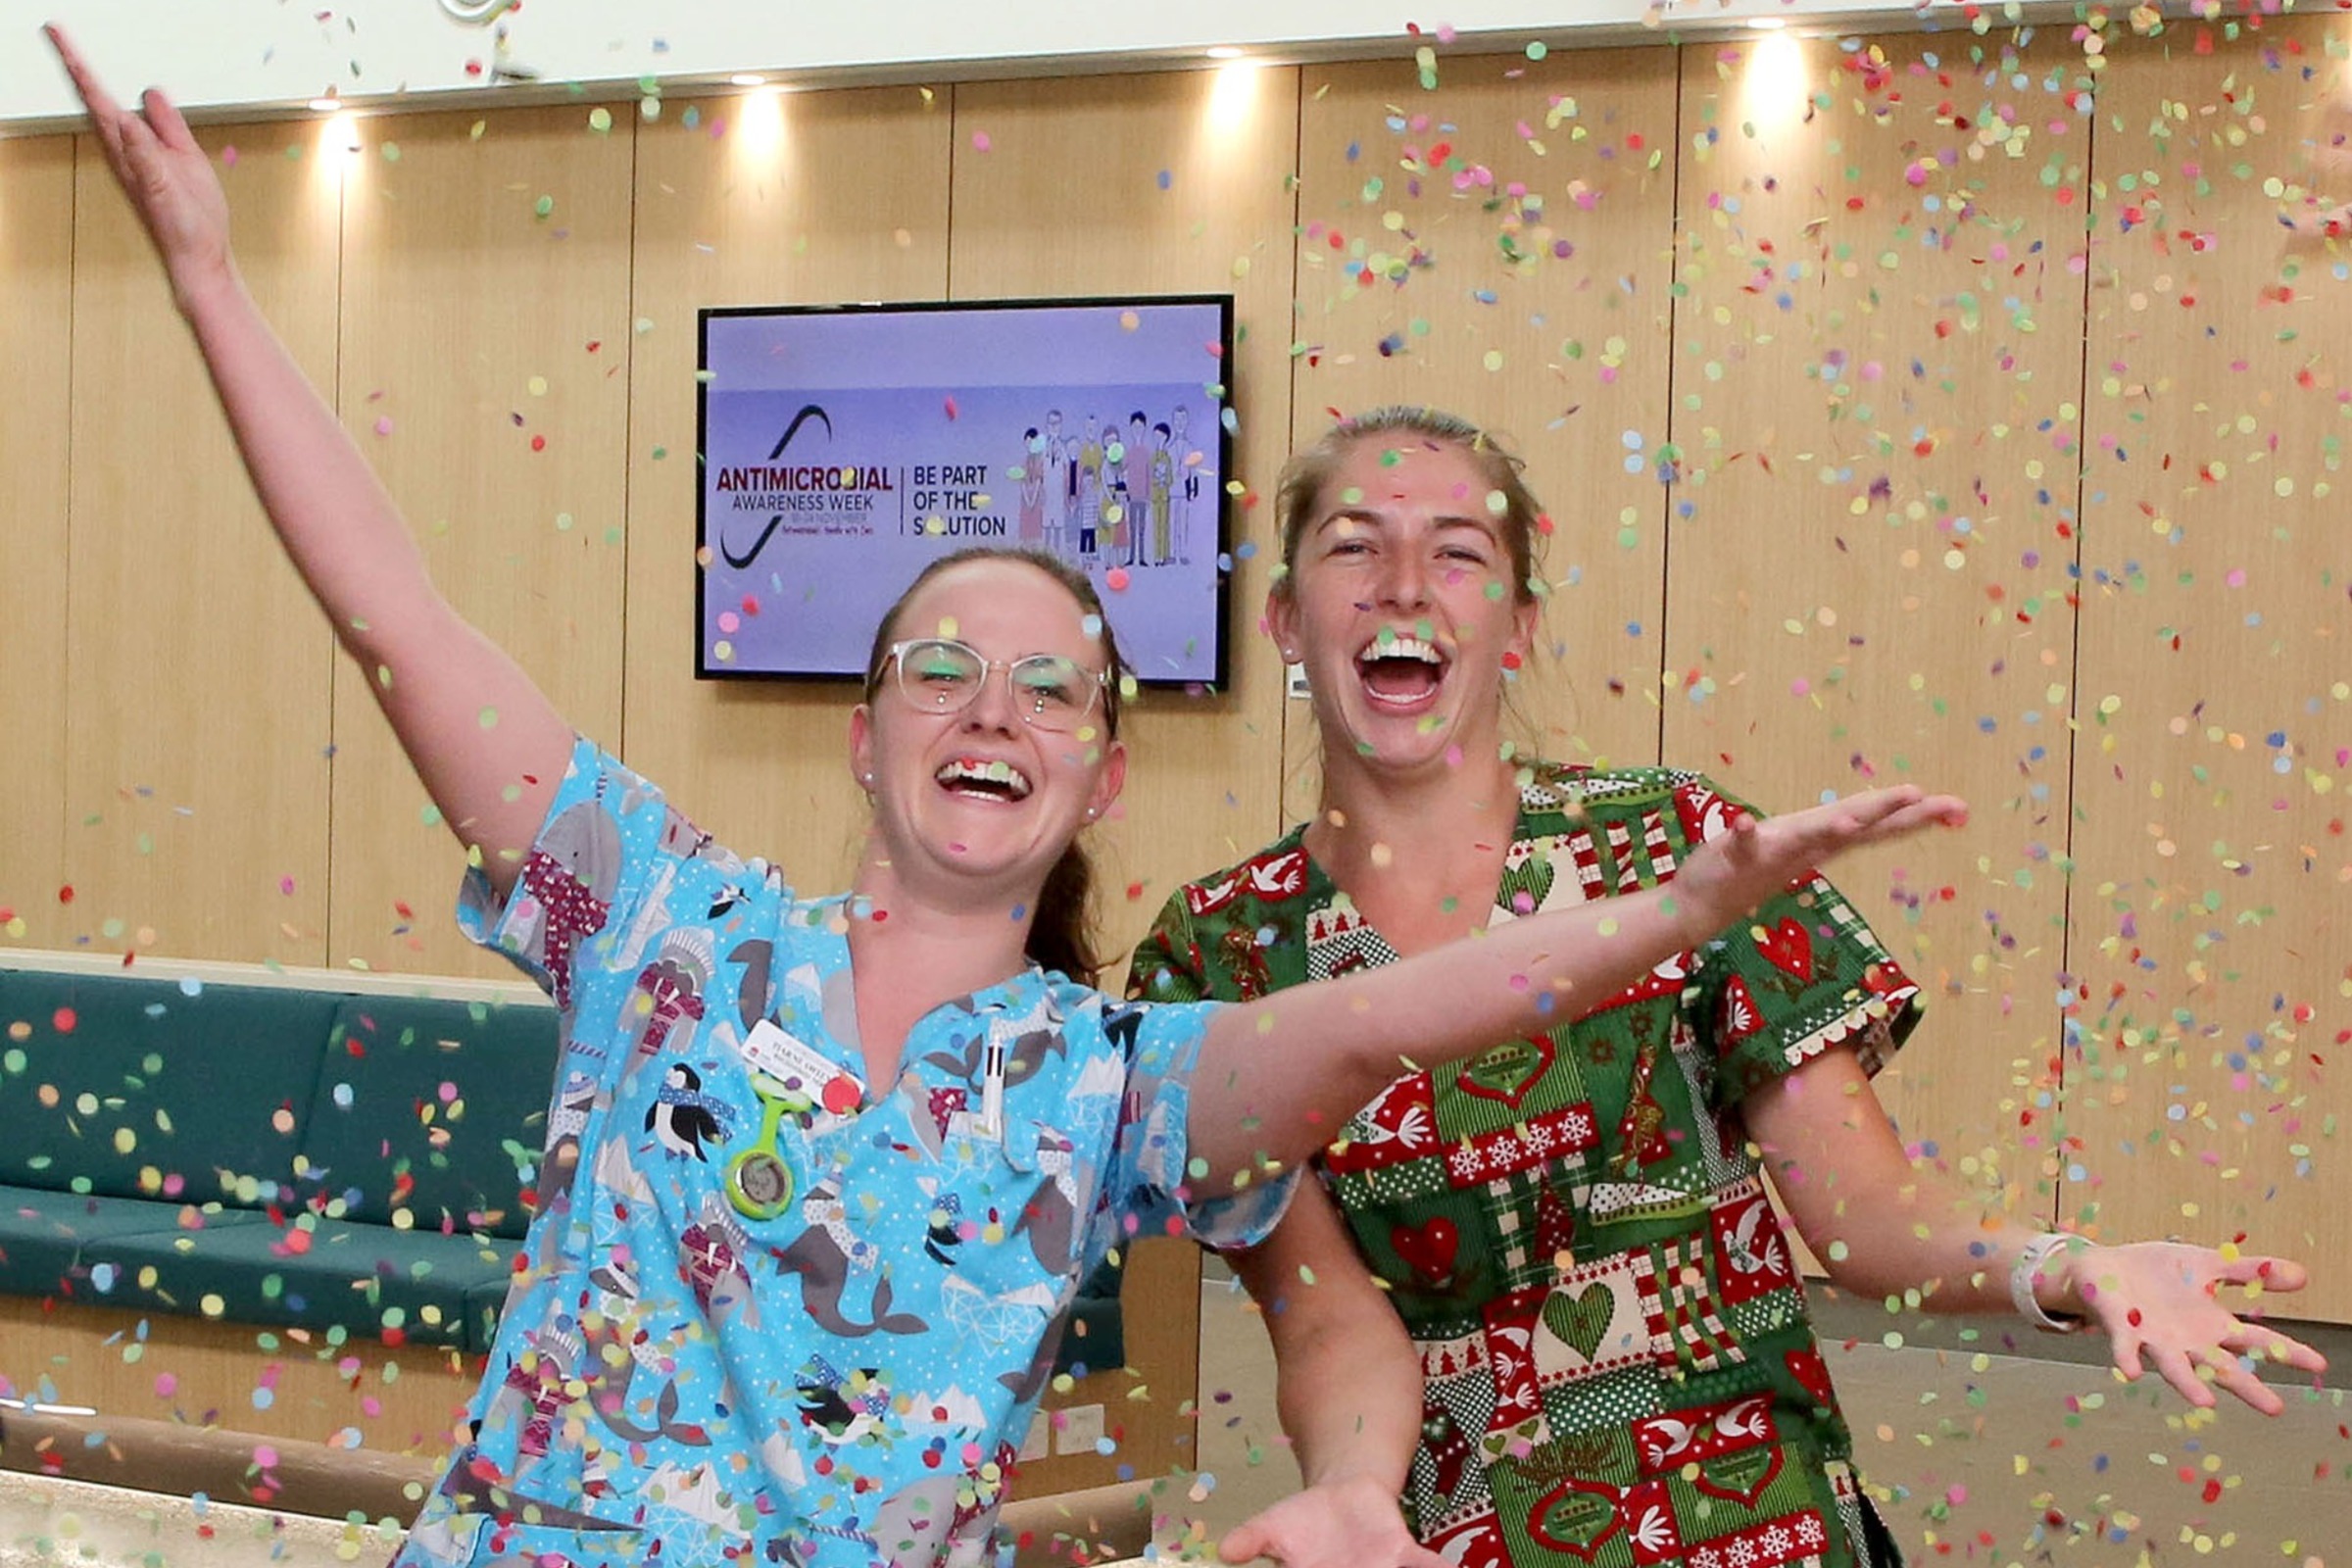 Staff wearing patterned scrubs throwing confetti in the air 